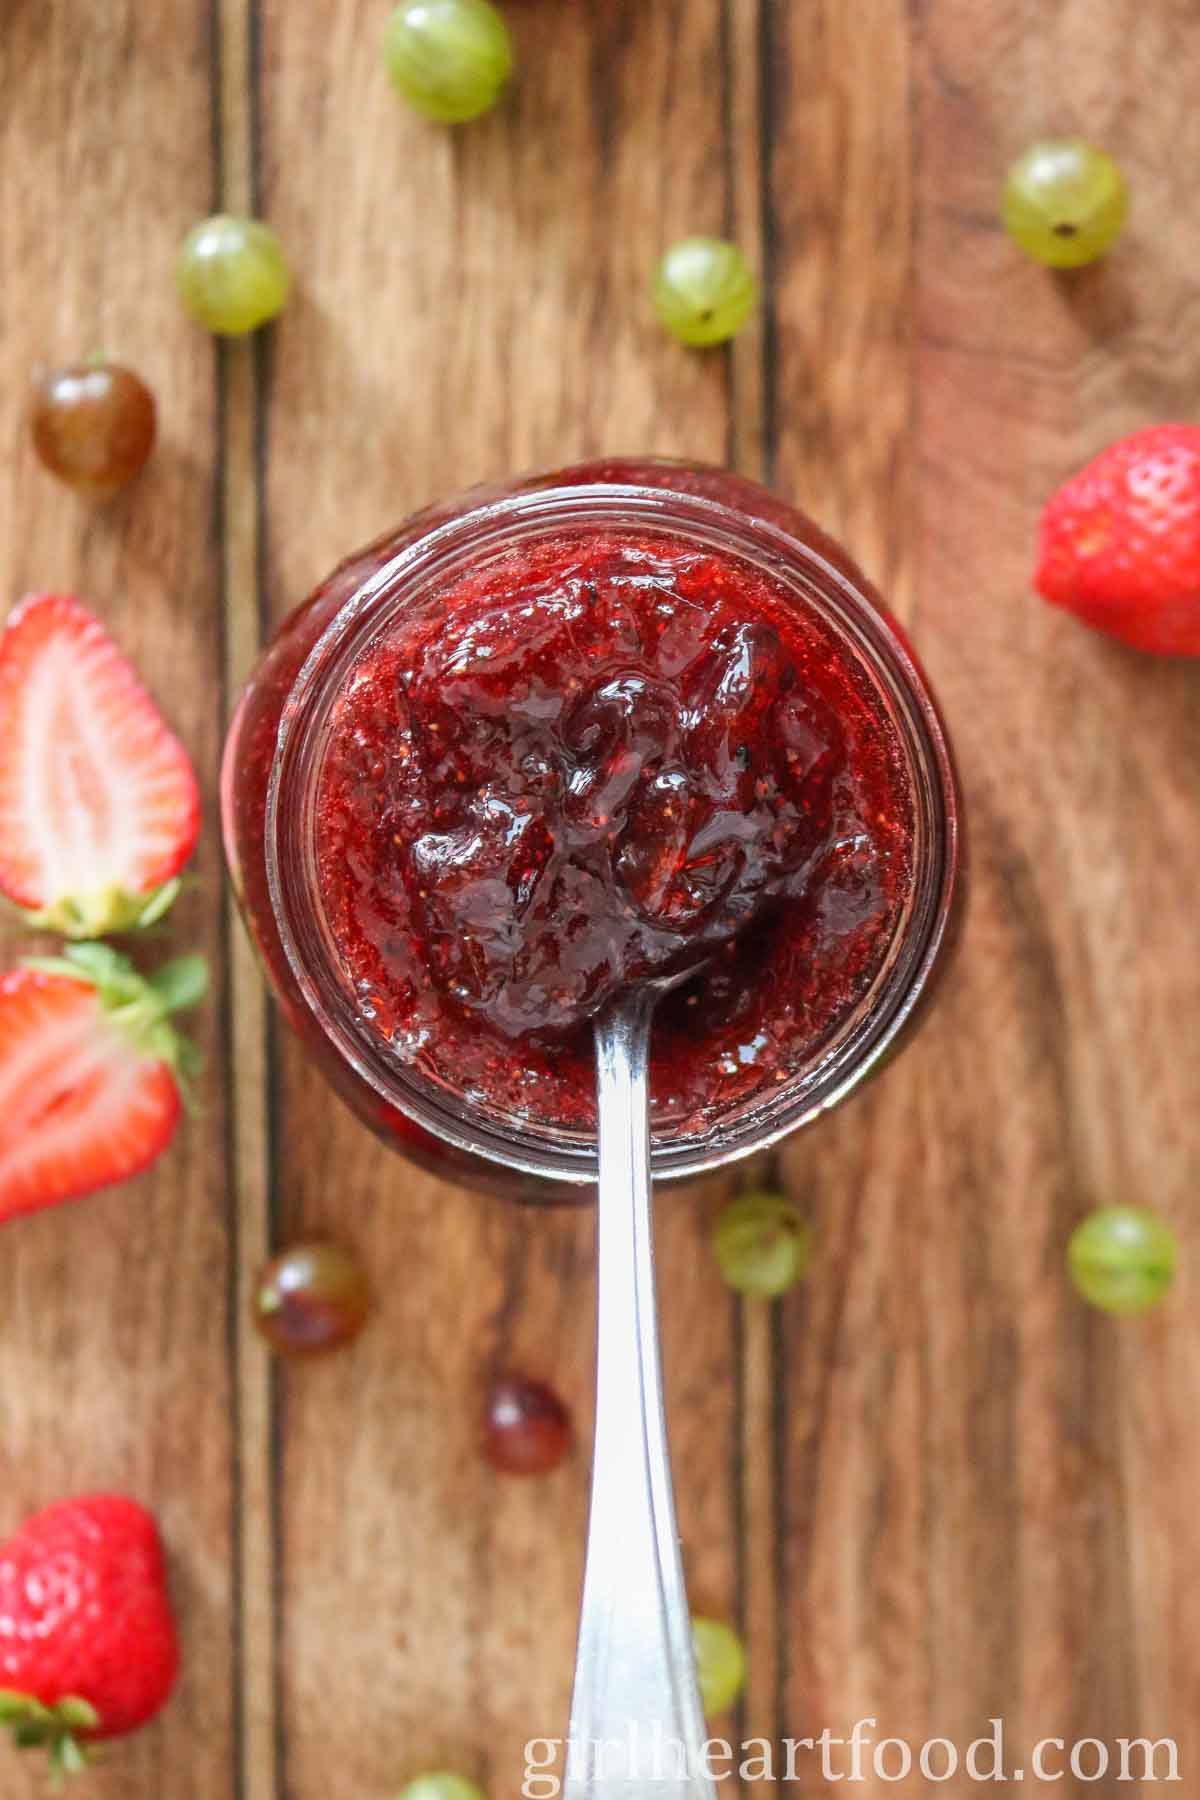 Overhead shot of a jar of gooseberry strawberry jam with a spoon.